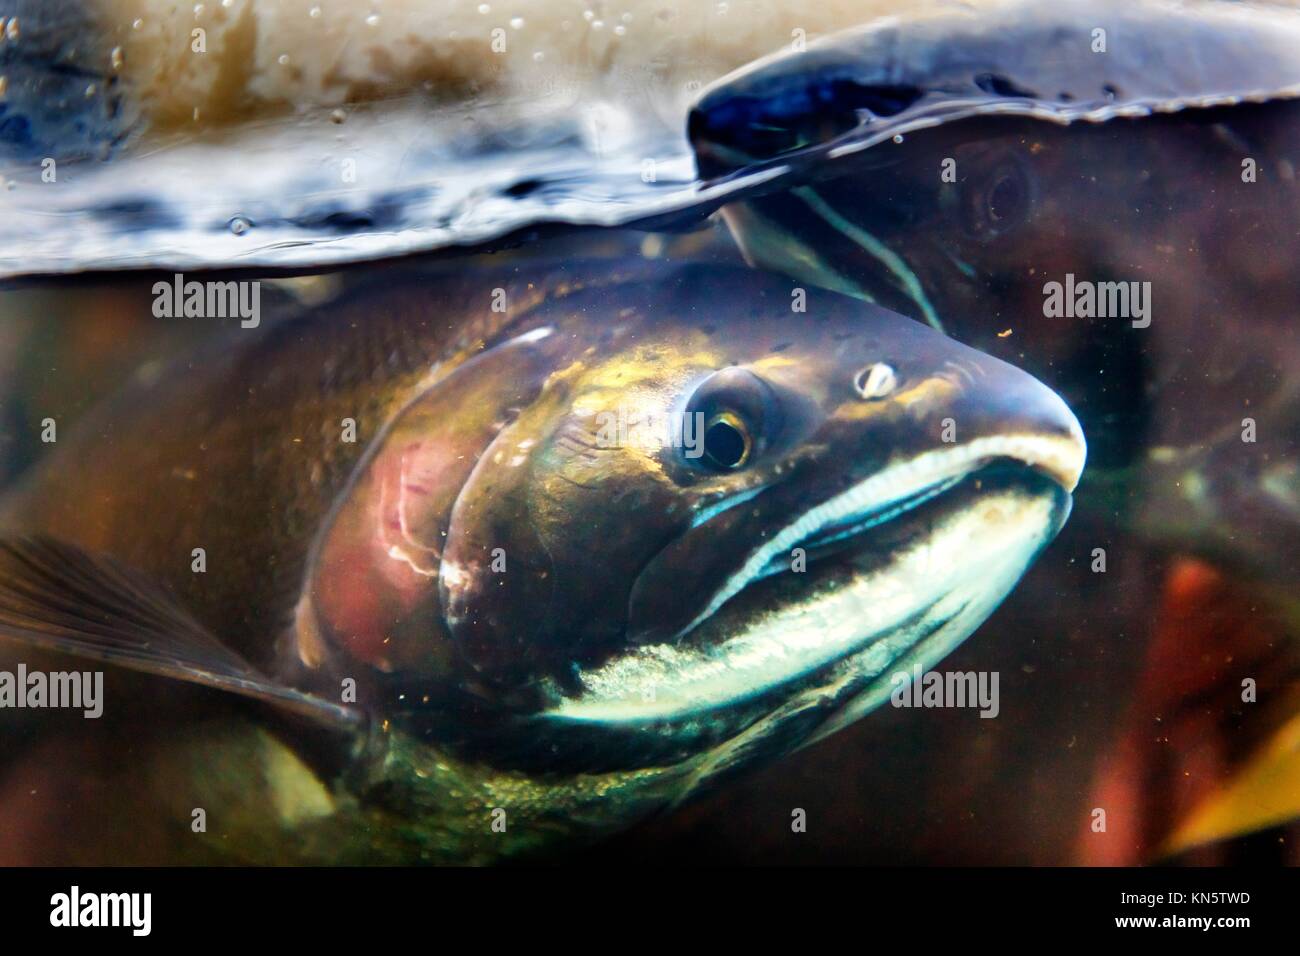 Fear Salmon Oncorhynchus tshawytscha Issaquah Hatchery Washington. Salmon swim up the Issaquah creek from the sea and are caught in the Hatchery. In Stock Photo